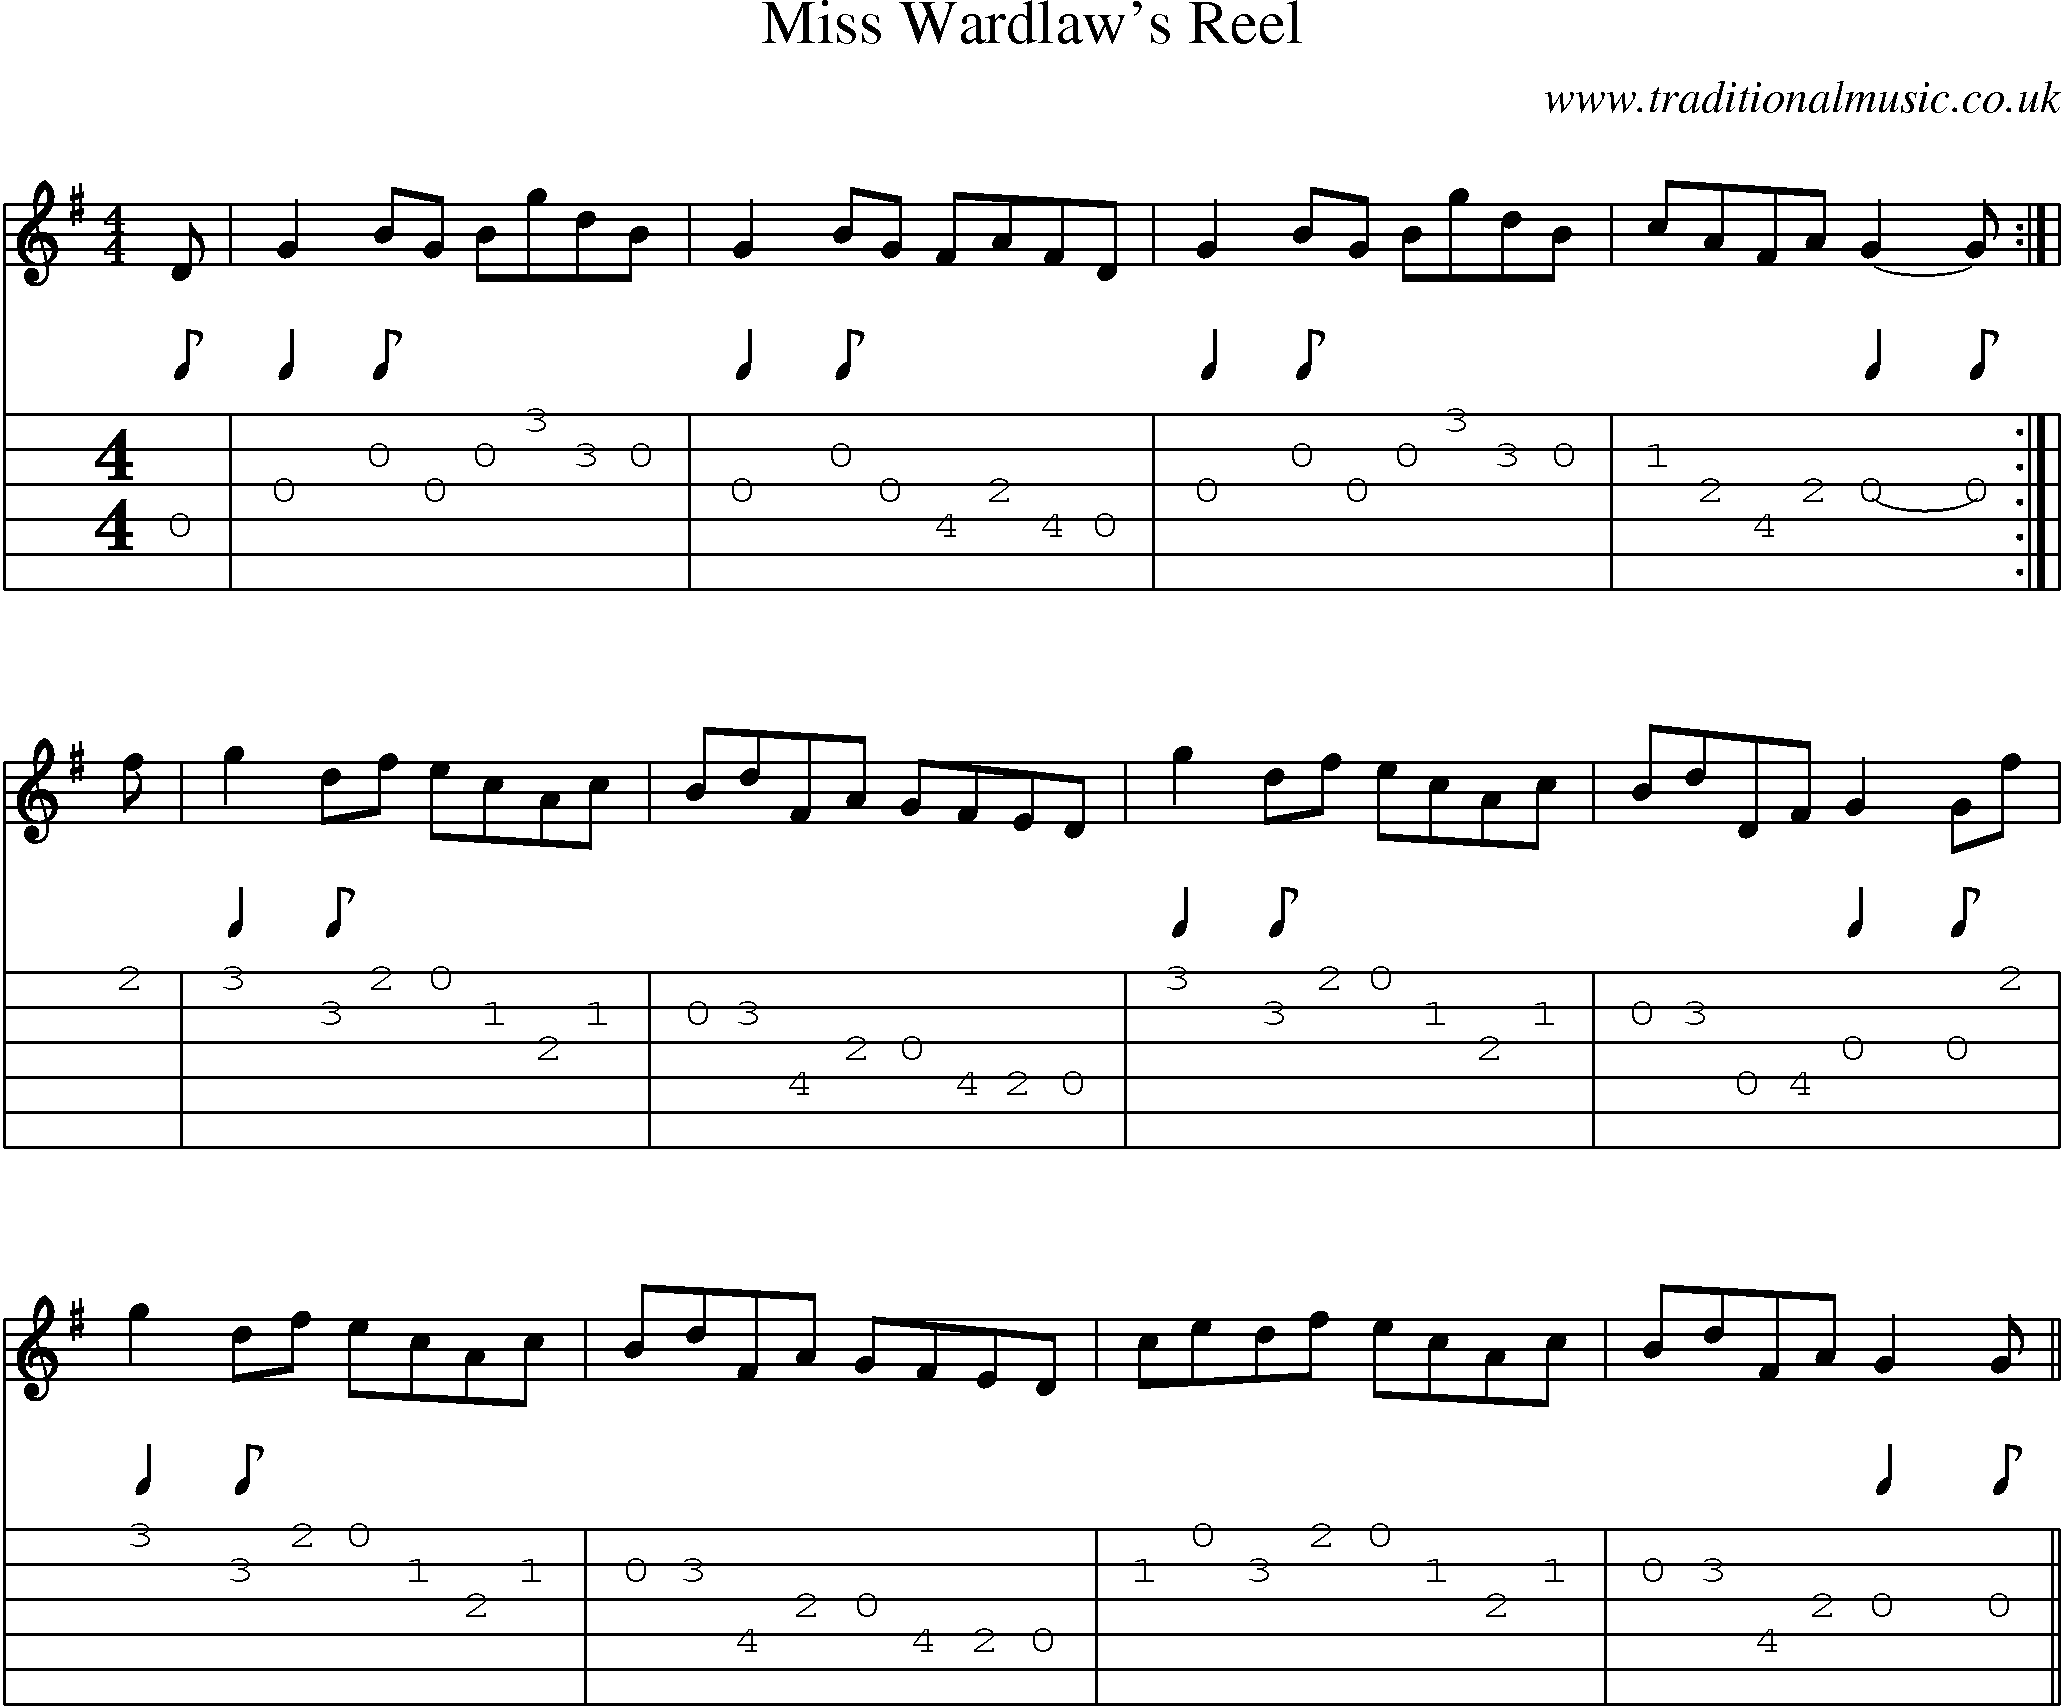 Music Score and Guitar Tabs for Miss Wardlaws Reel